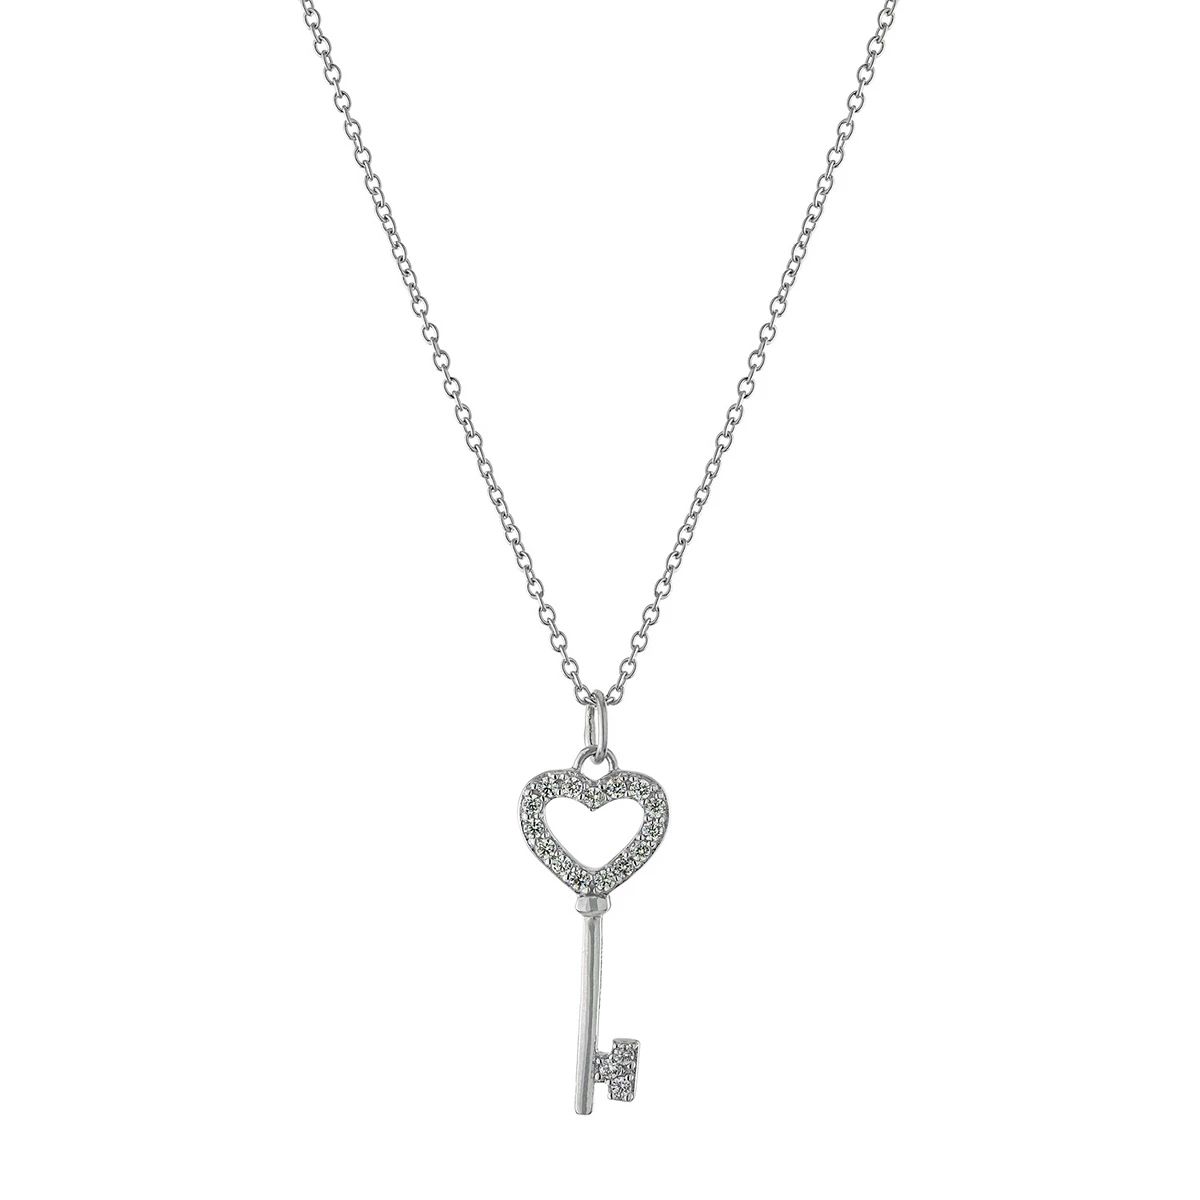 Main and Sterling Sterling Silver Cubic Zirconia Open Heart Key Pendant Necklace | Kohl's